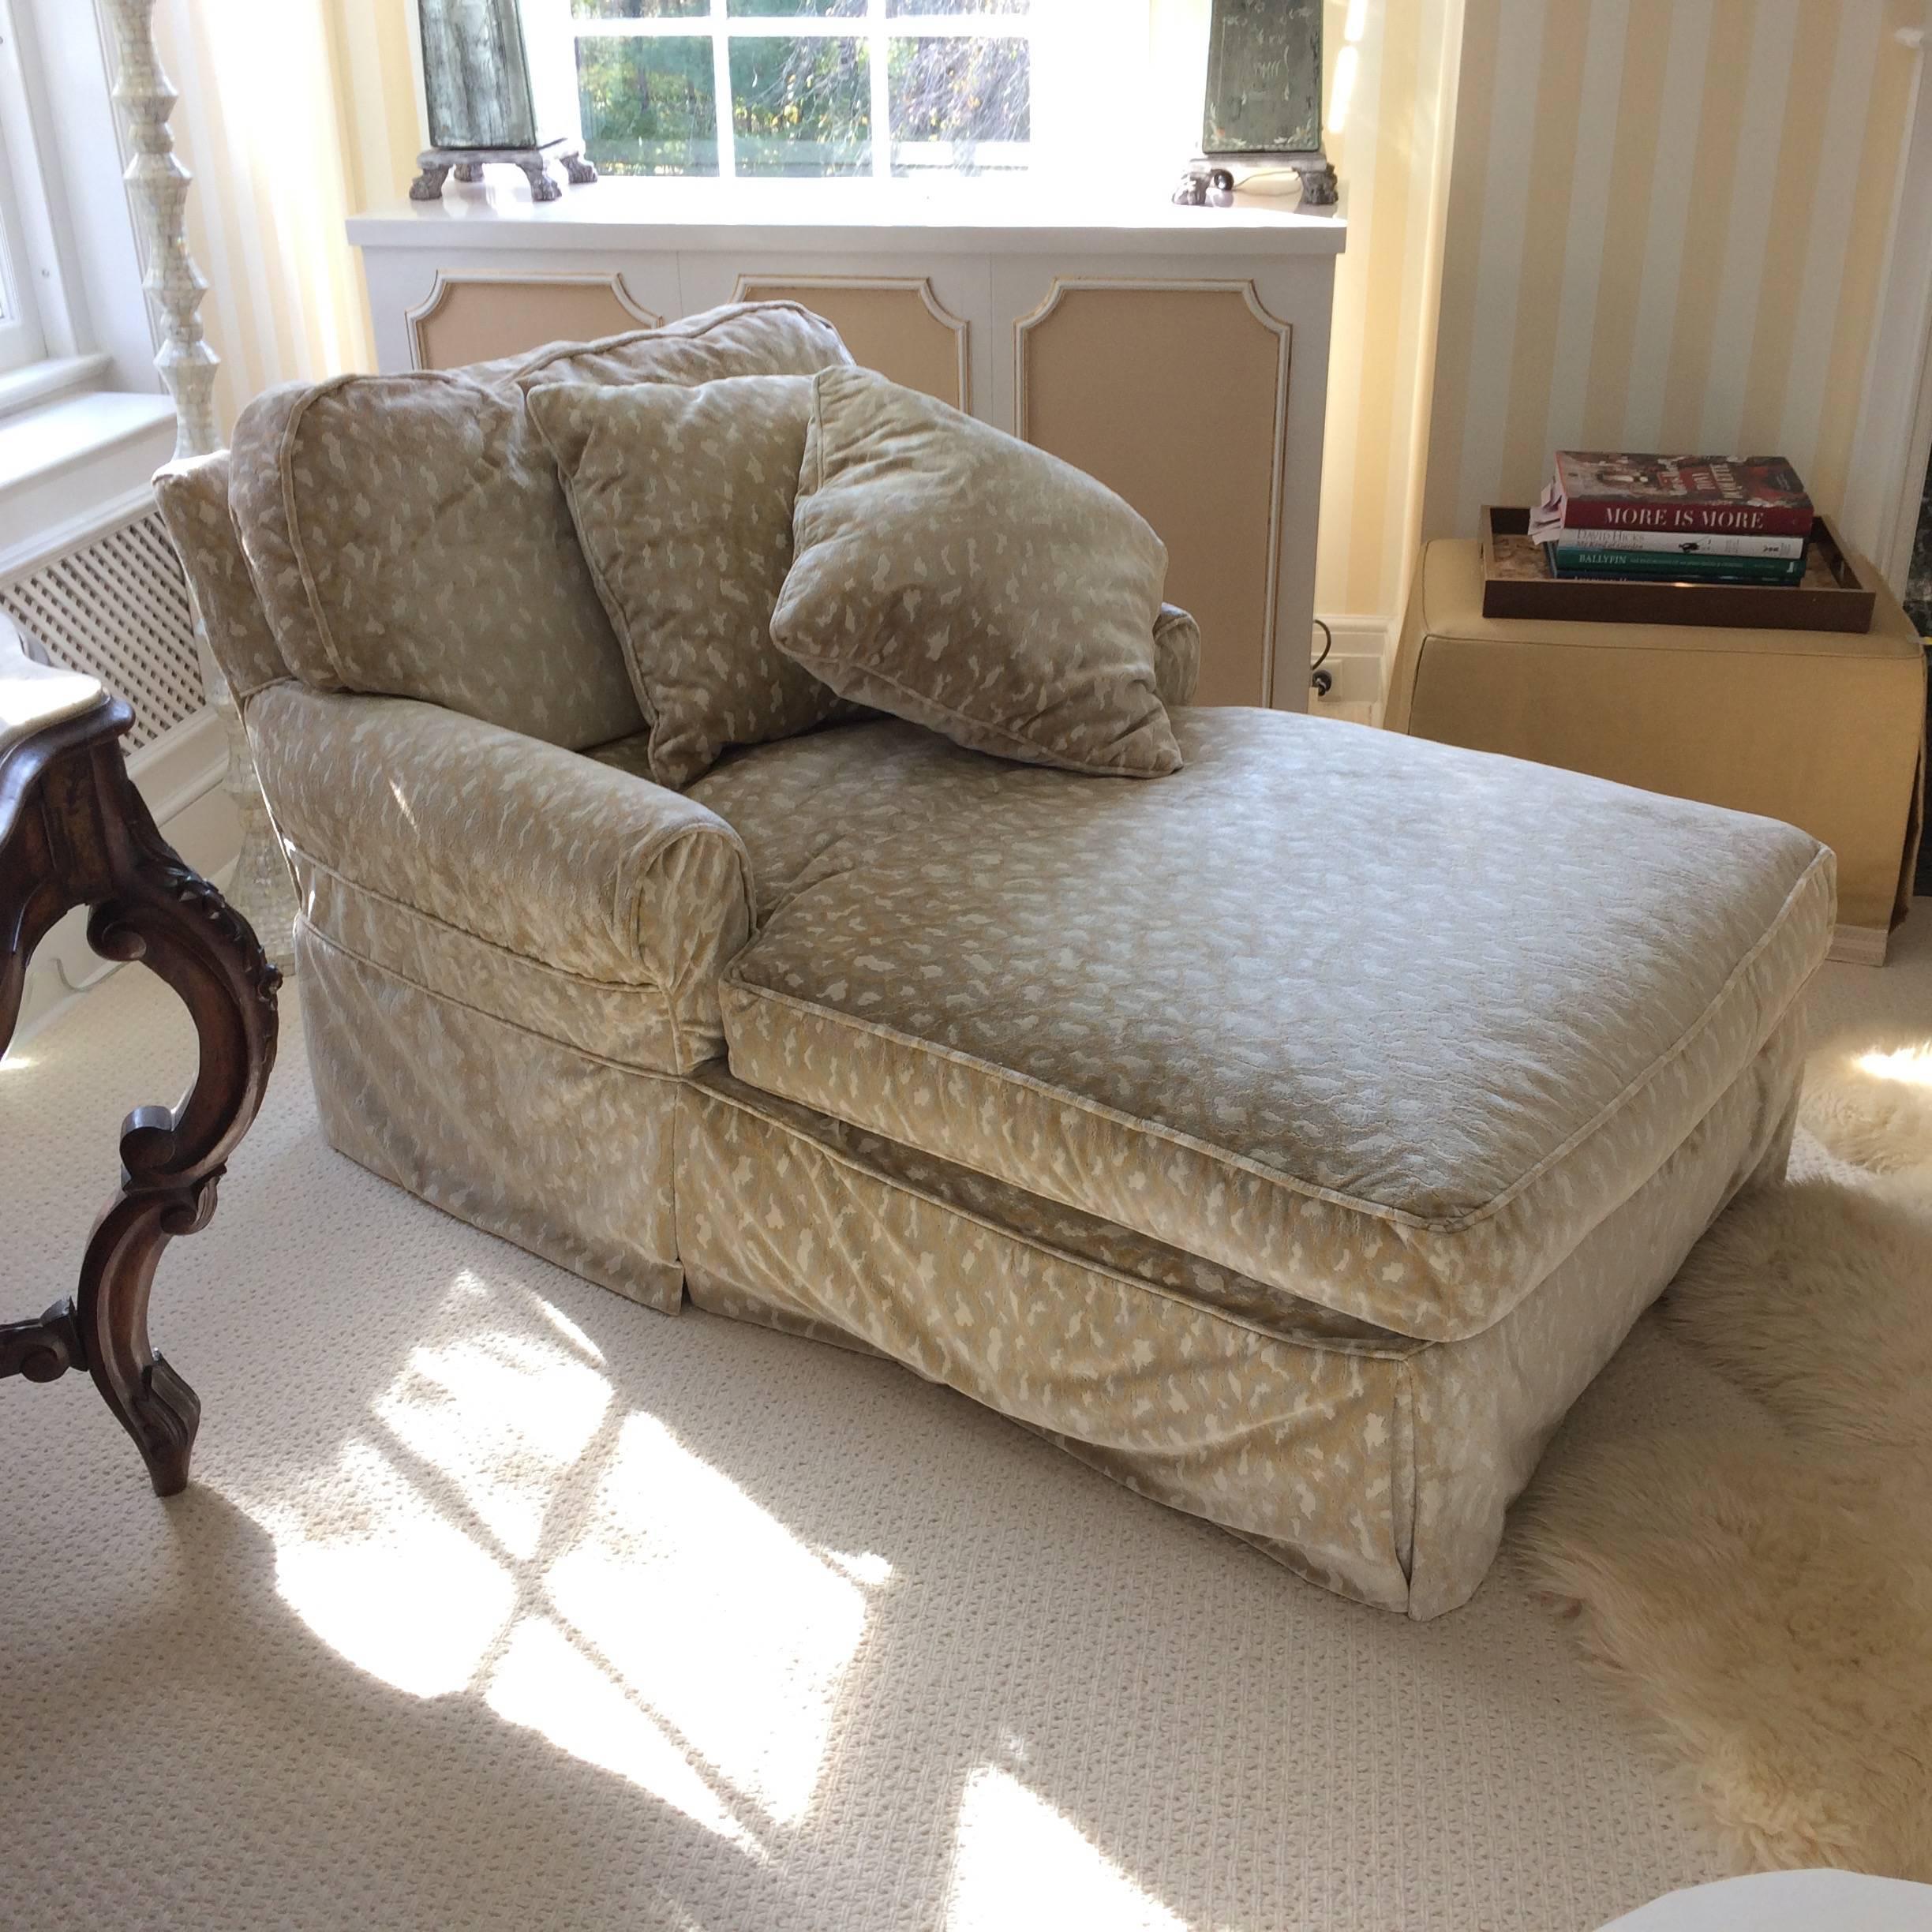 Oversized and enveloping luxury in a custom down filled chaise, upholstered in a dreamy soft faux animal print chenille with soft grey, taupe and cream palette.
Designer Celerie Kemble selected chaise and fabric for a discerning Princeton client.